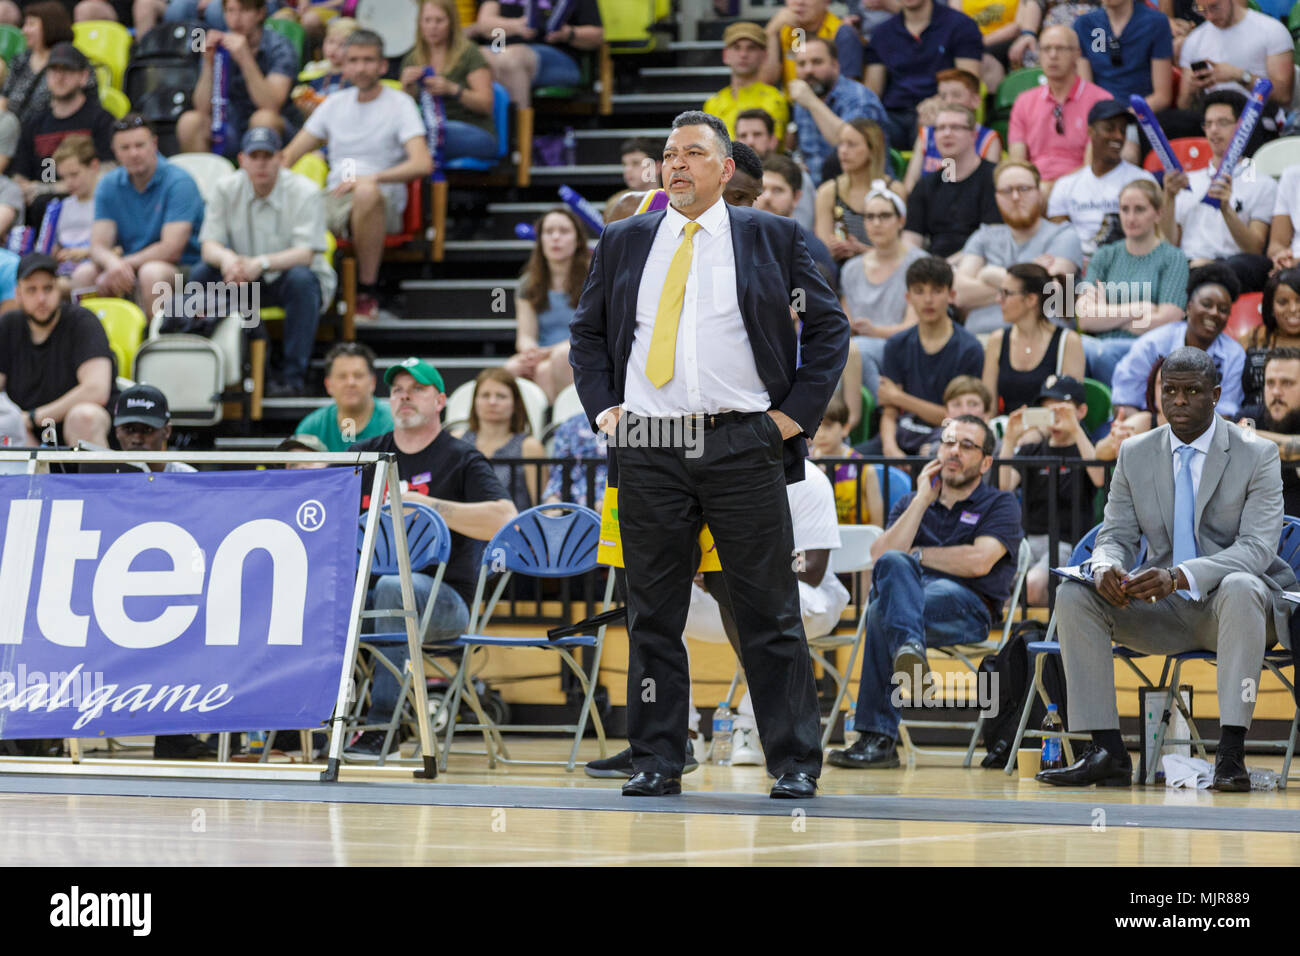 Copper Box Arena, 6th May 2018. Lions win the game 94-90 in a cliffhanger that saw the game going time twice. Lions coach Vince Macaulay shouts from the sideline.